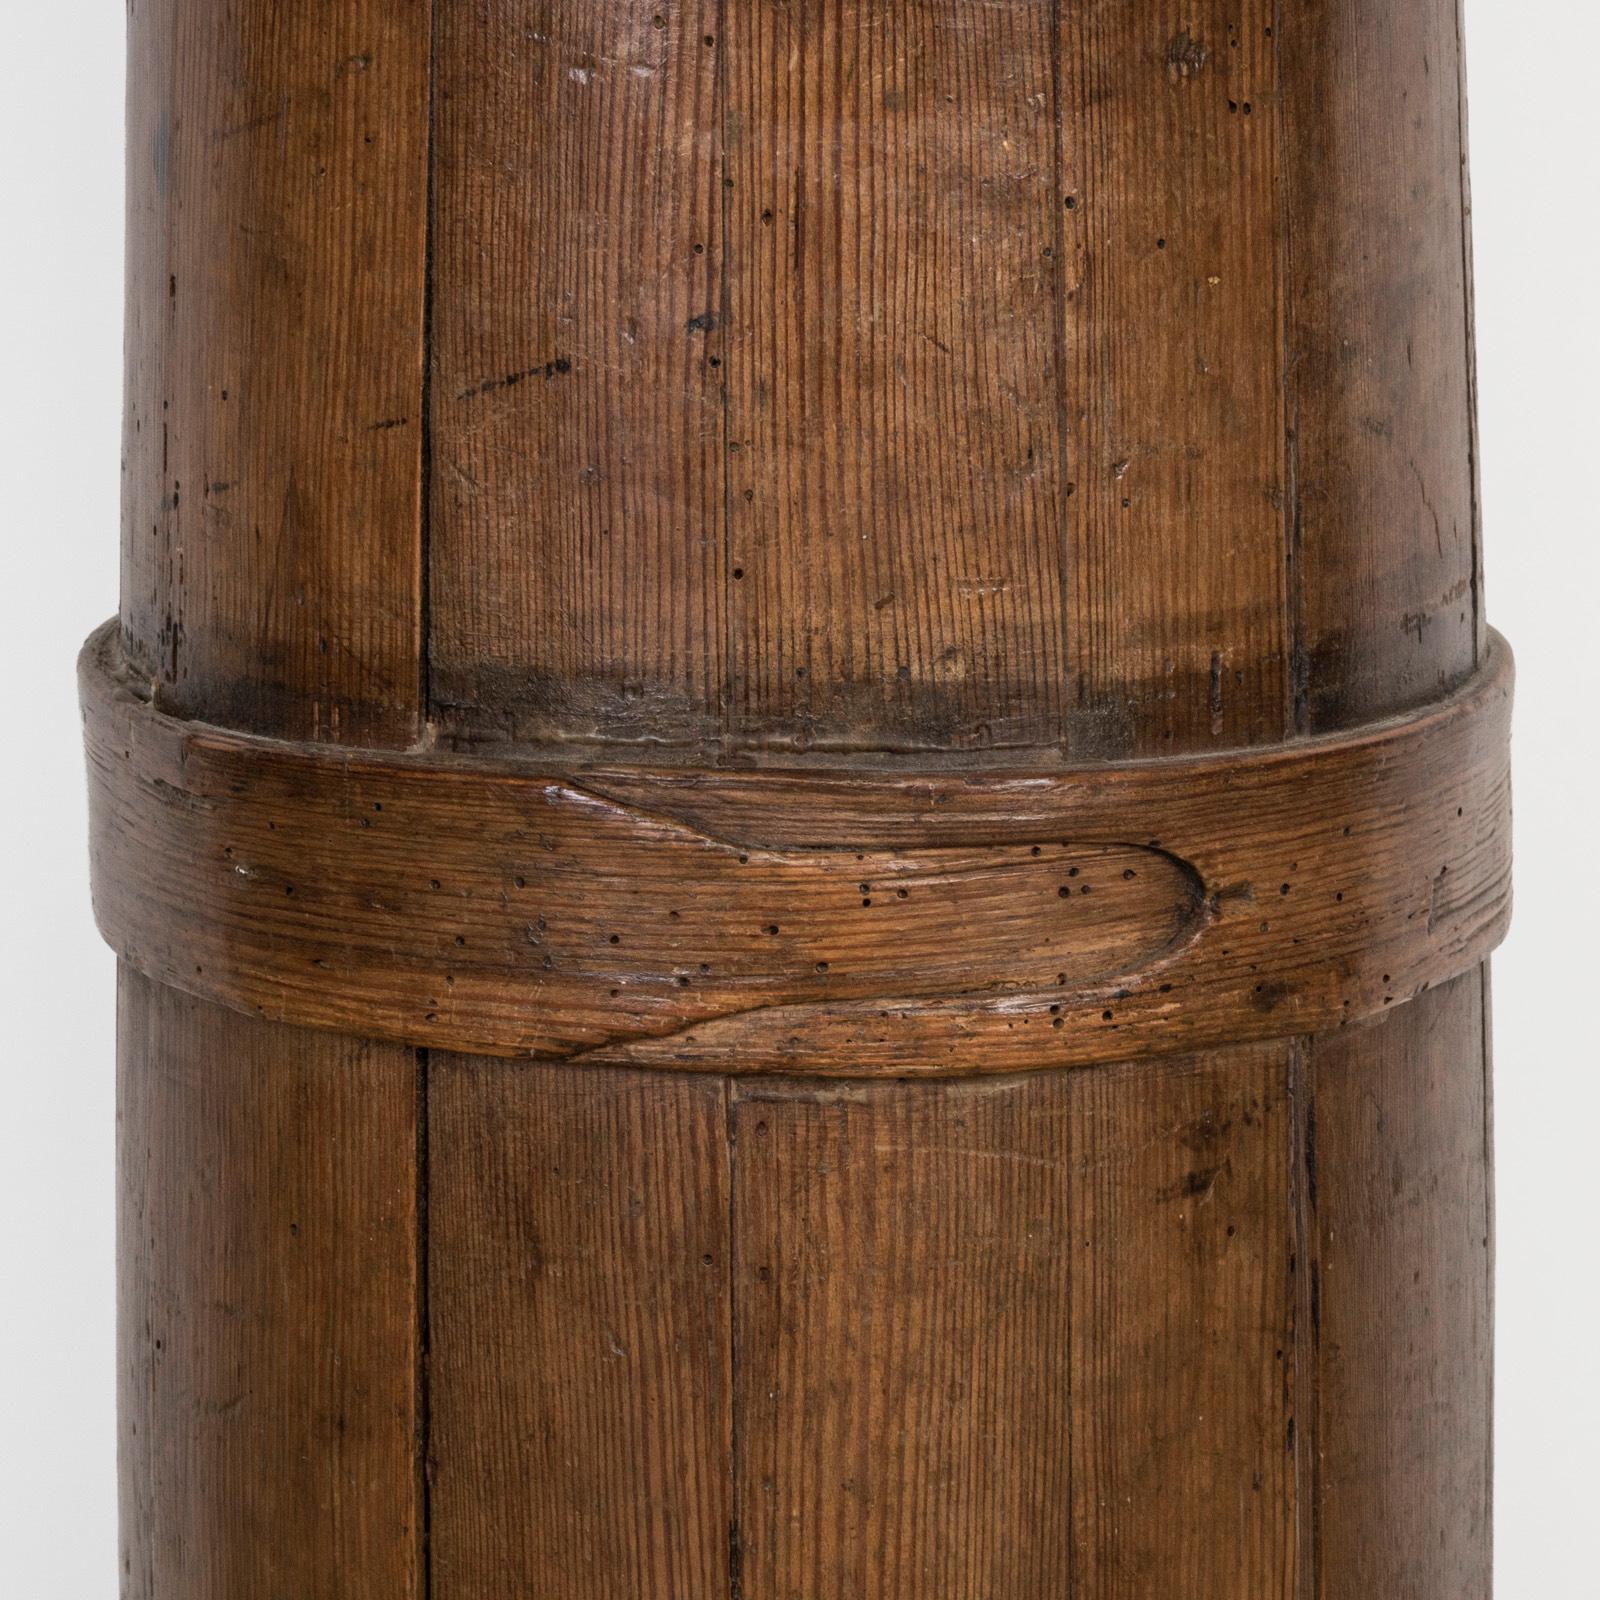 French, wood and iron hallway umbrella stand, cane or stick rack, circa 1900.

This is an attractive wooden umbrella or cane stand, displaying a desirable aged patina and in good order.

Ideal for large umbrellas or a selection of canes and walking